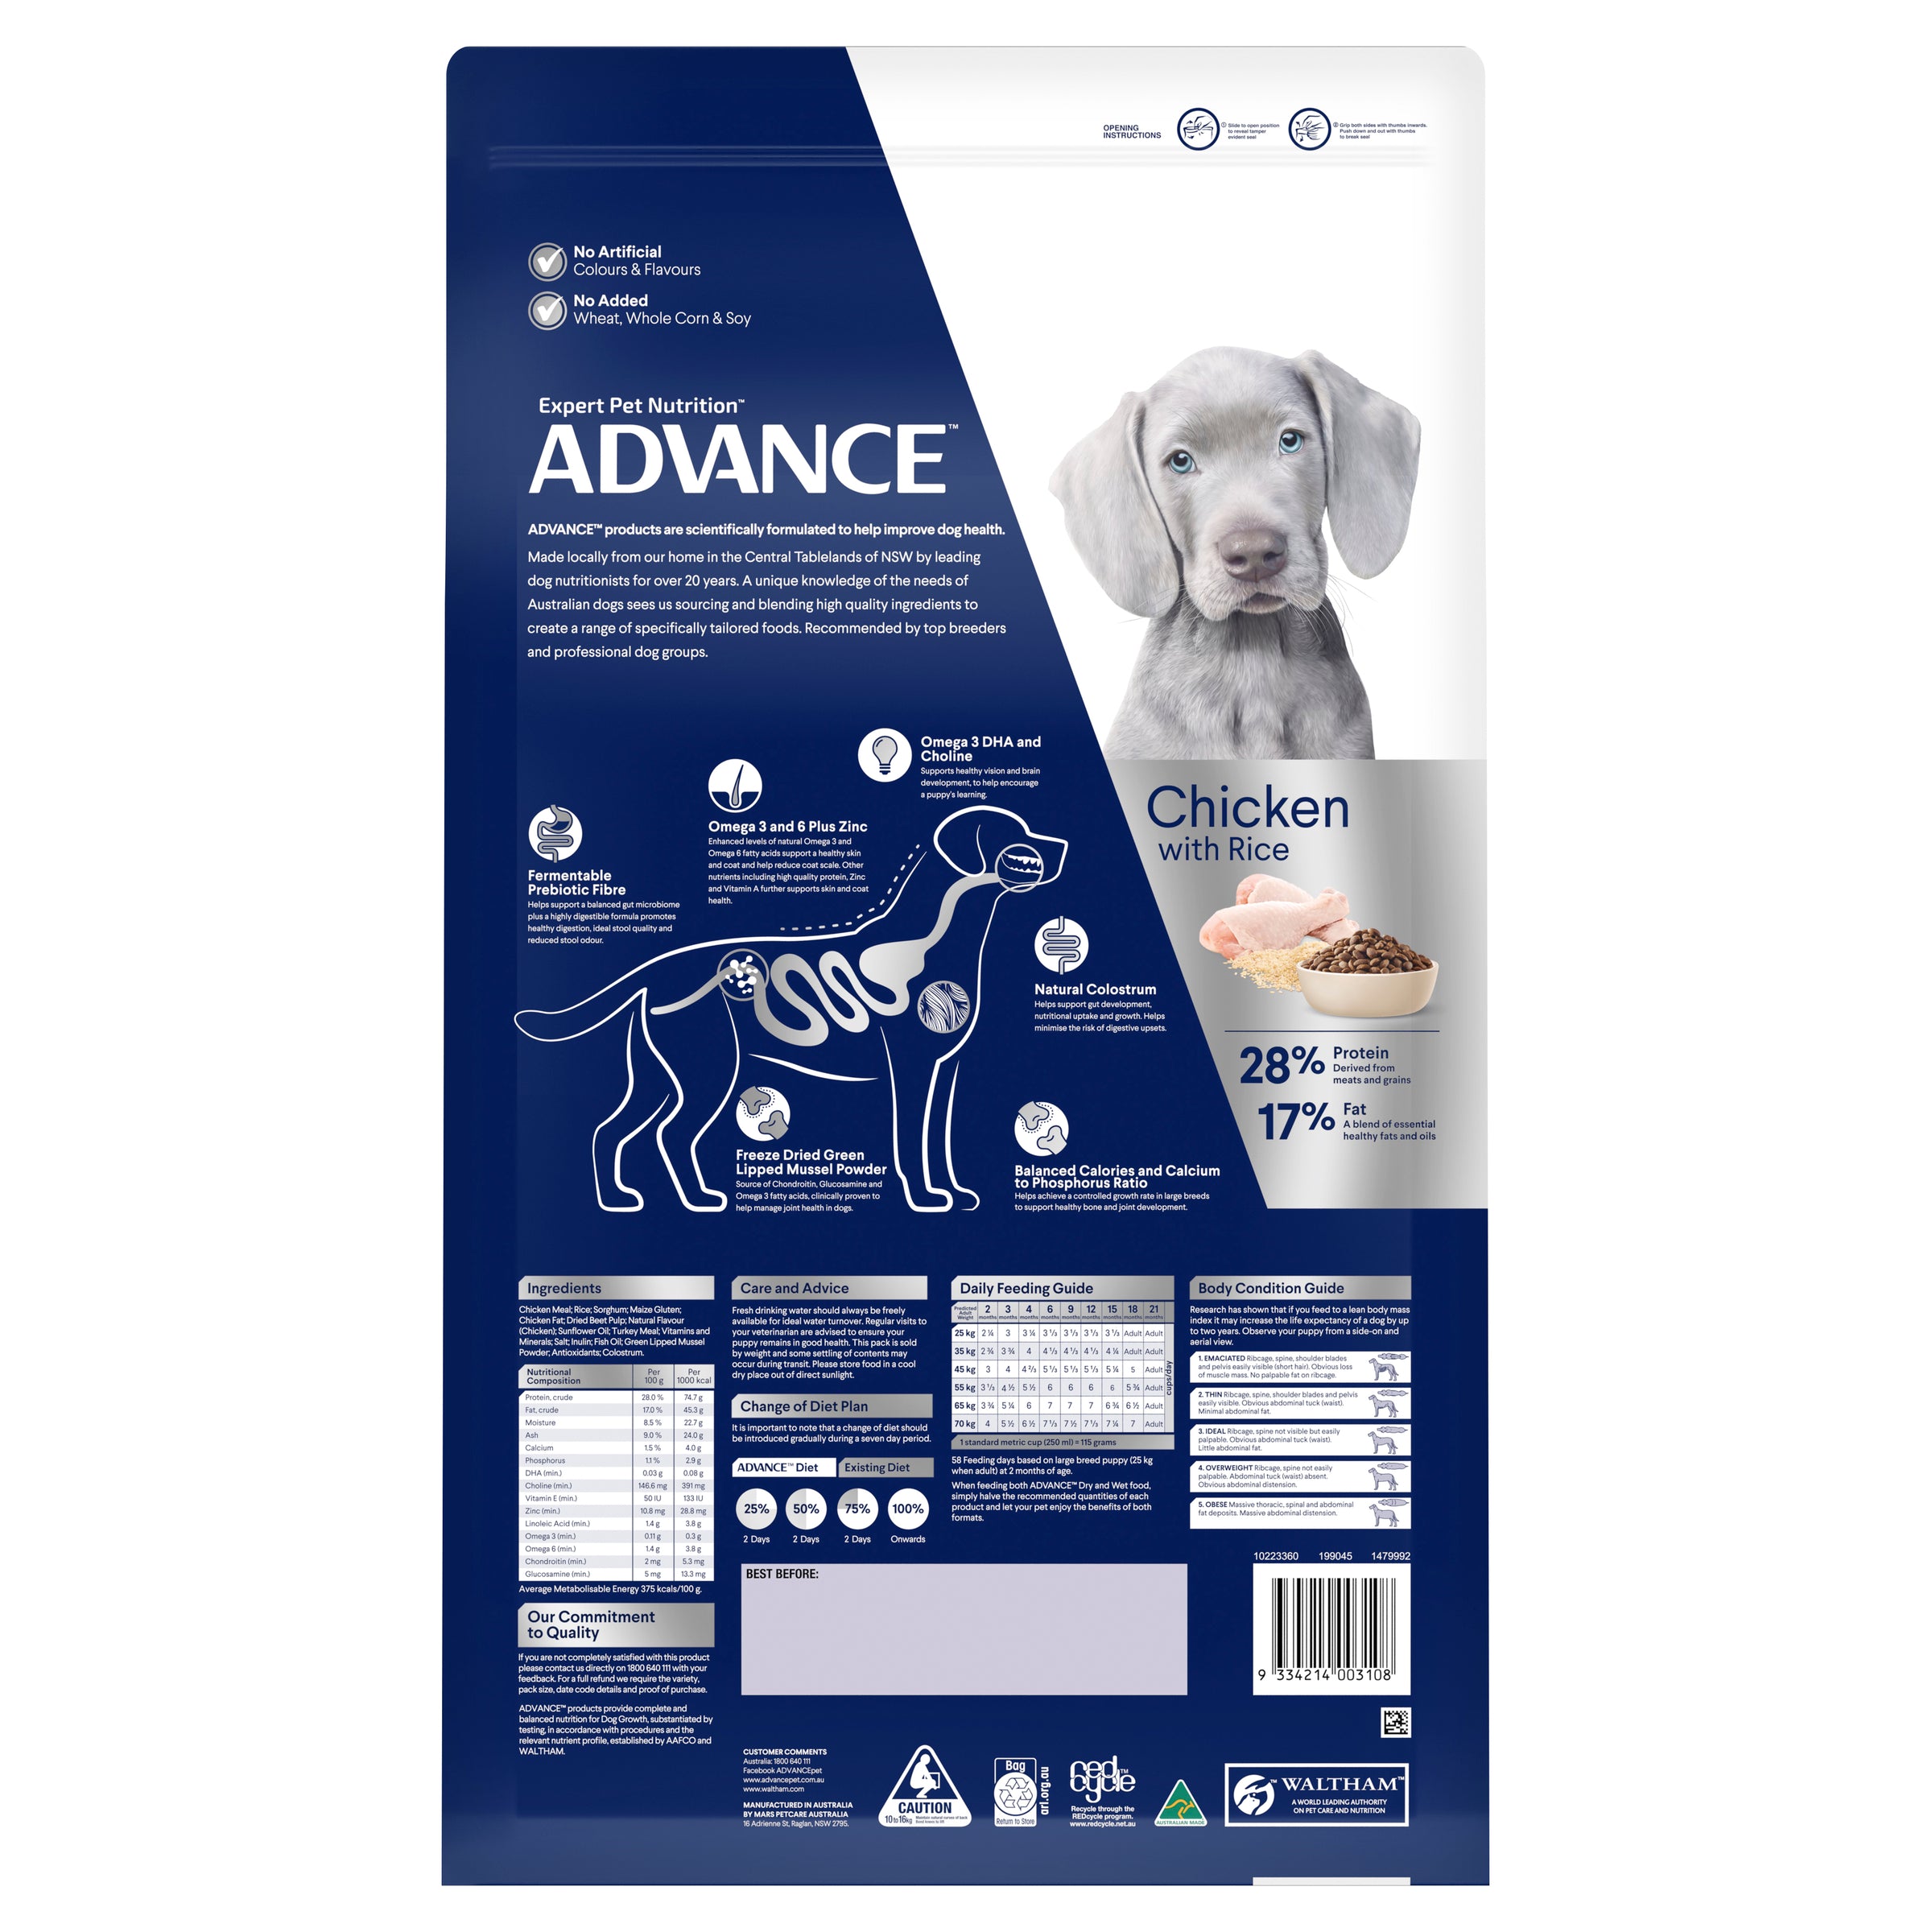 Advance Puppy Large Breed 3-15kg